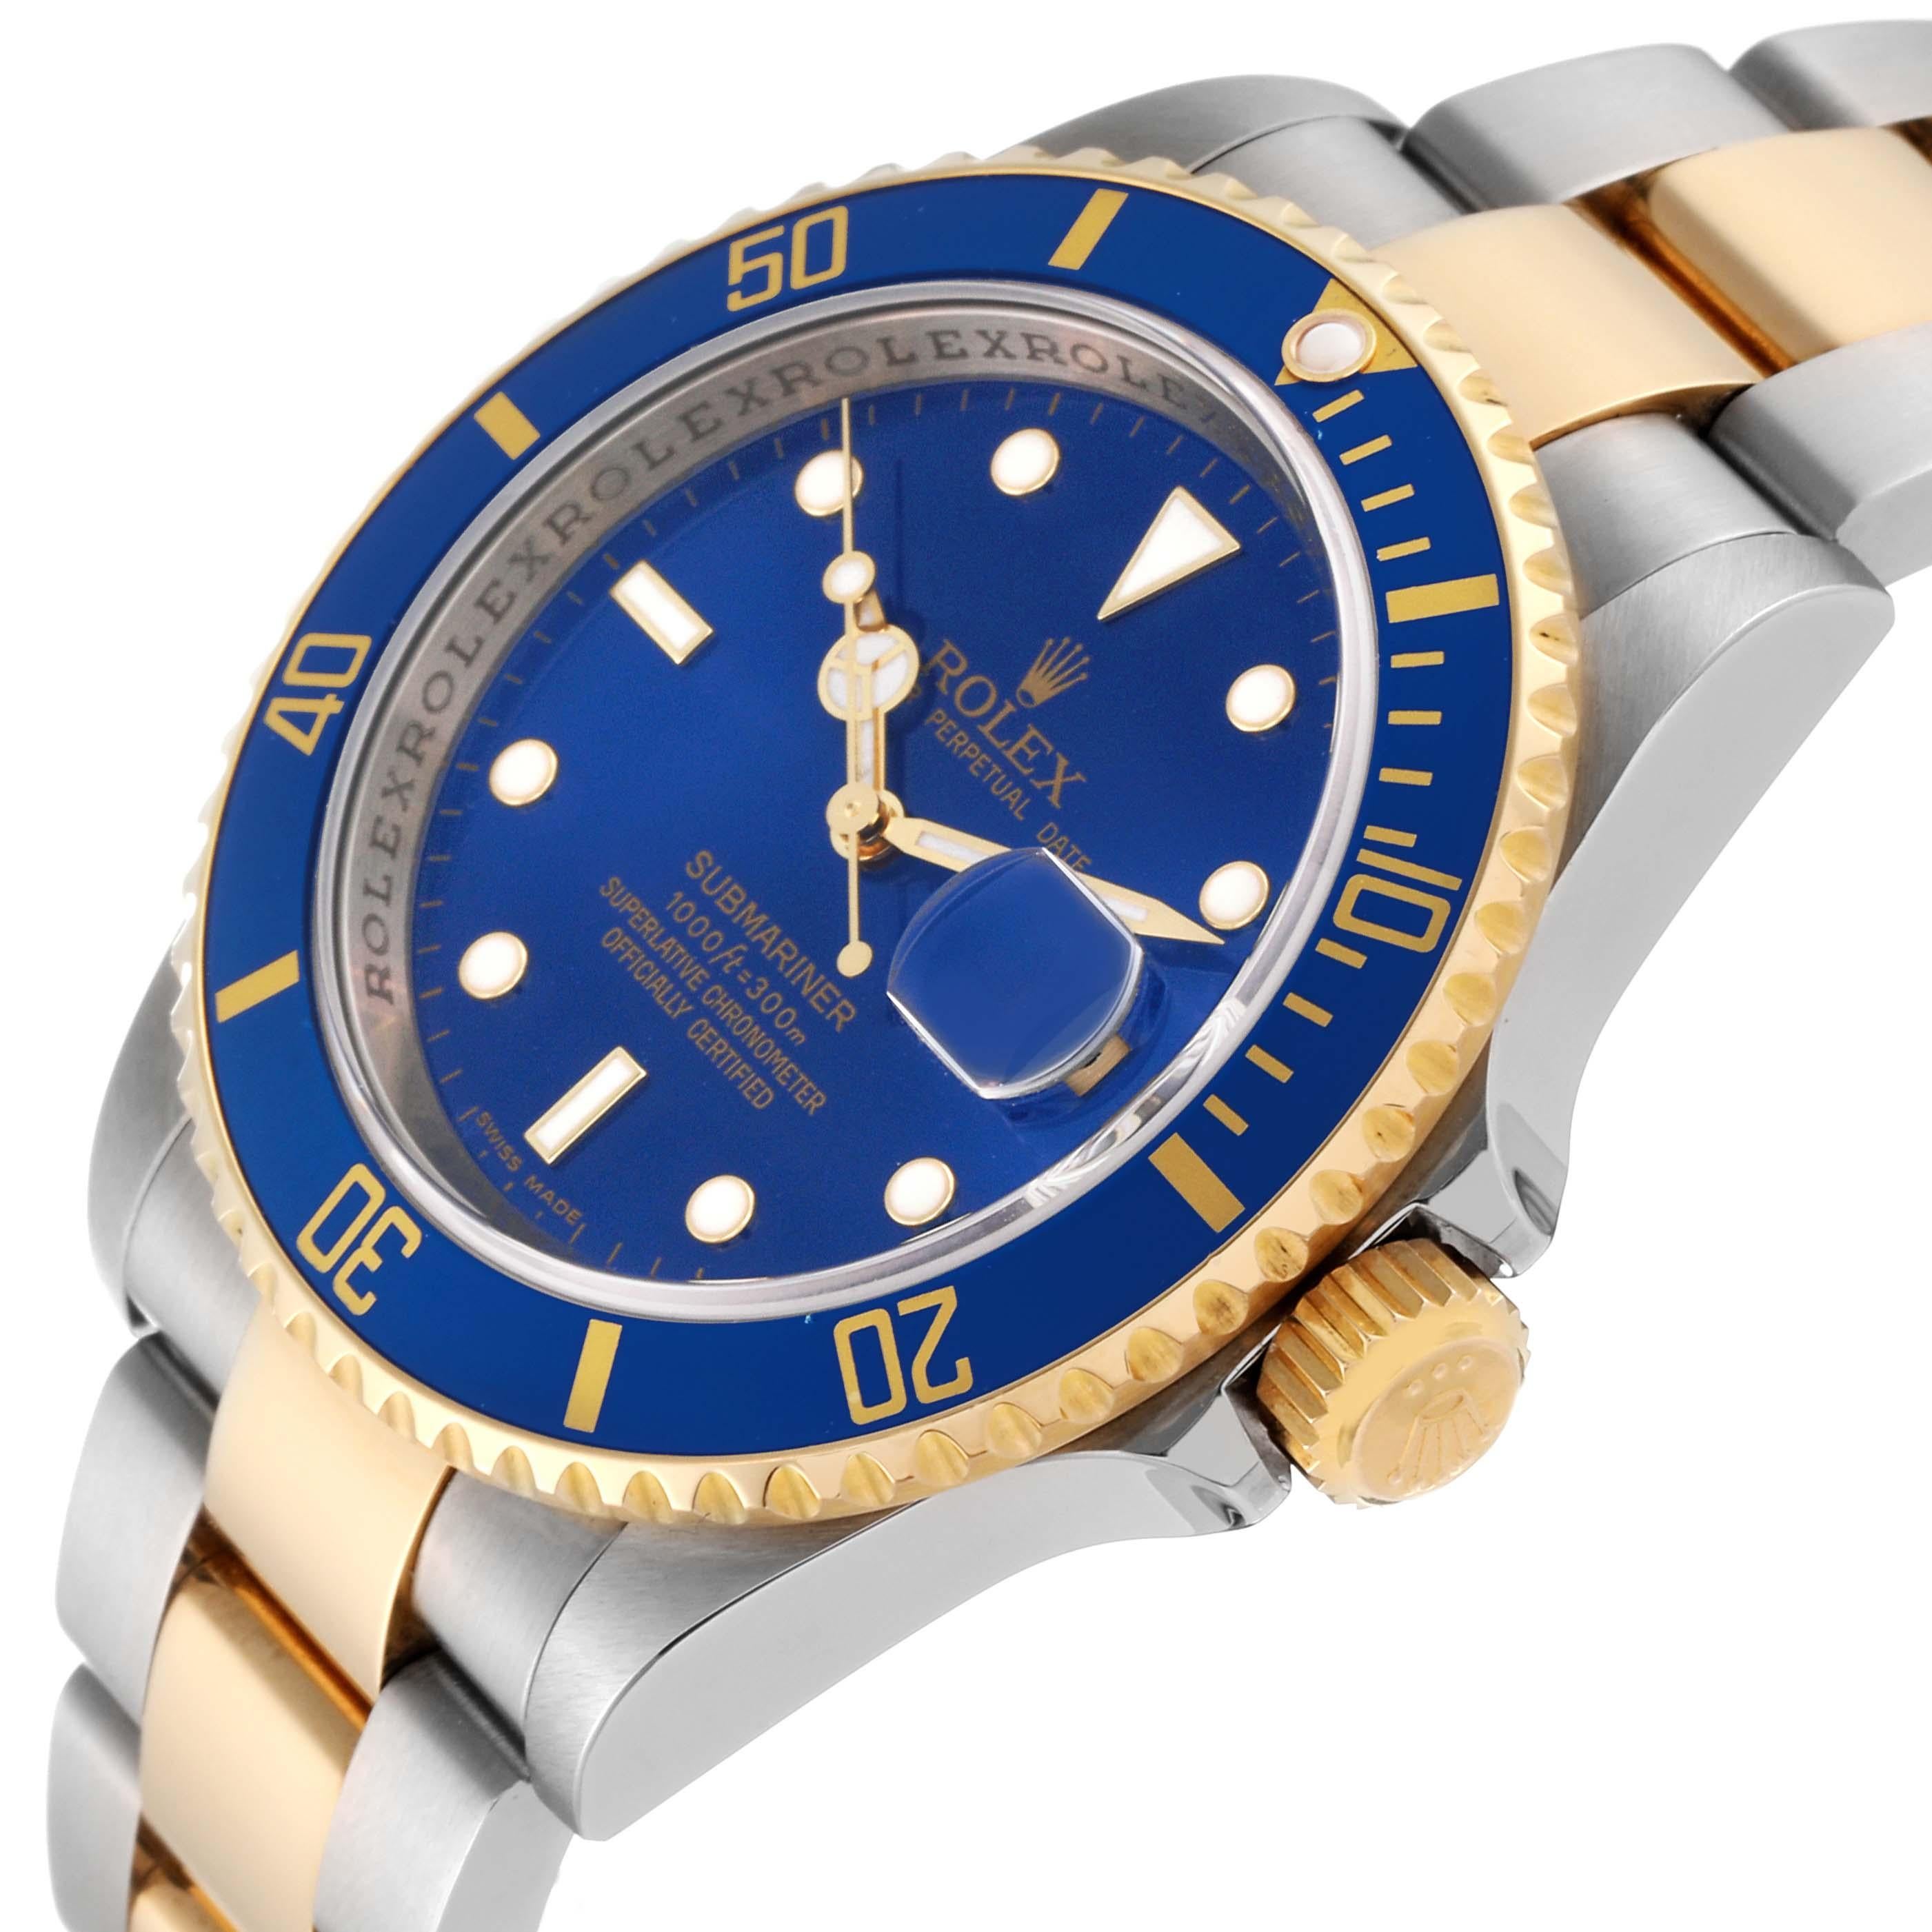 Rolex Submariner Blue Dial Steel Yellow Gold Mens Watch 16613 Box Card For Sale 1